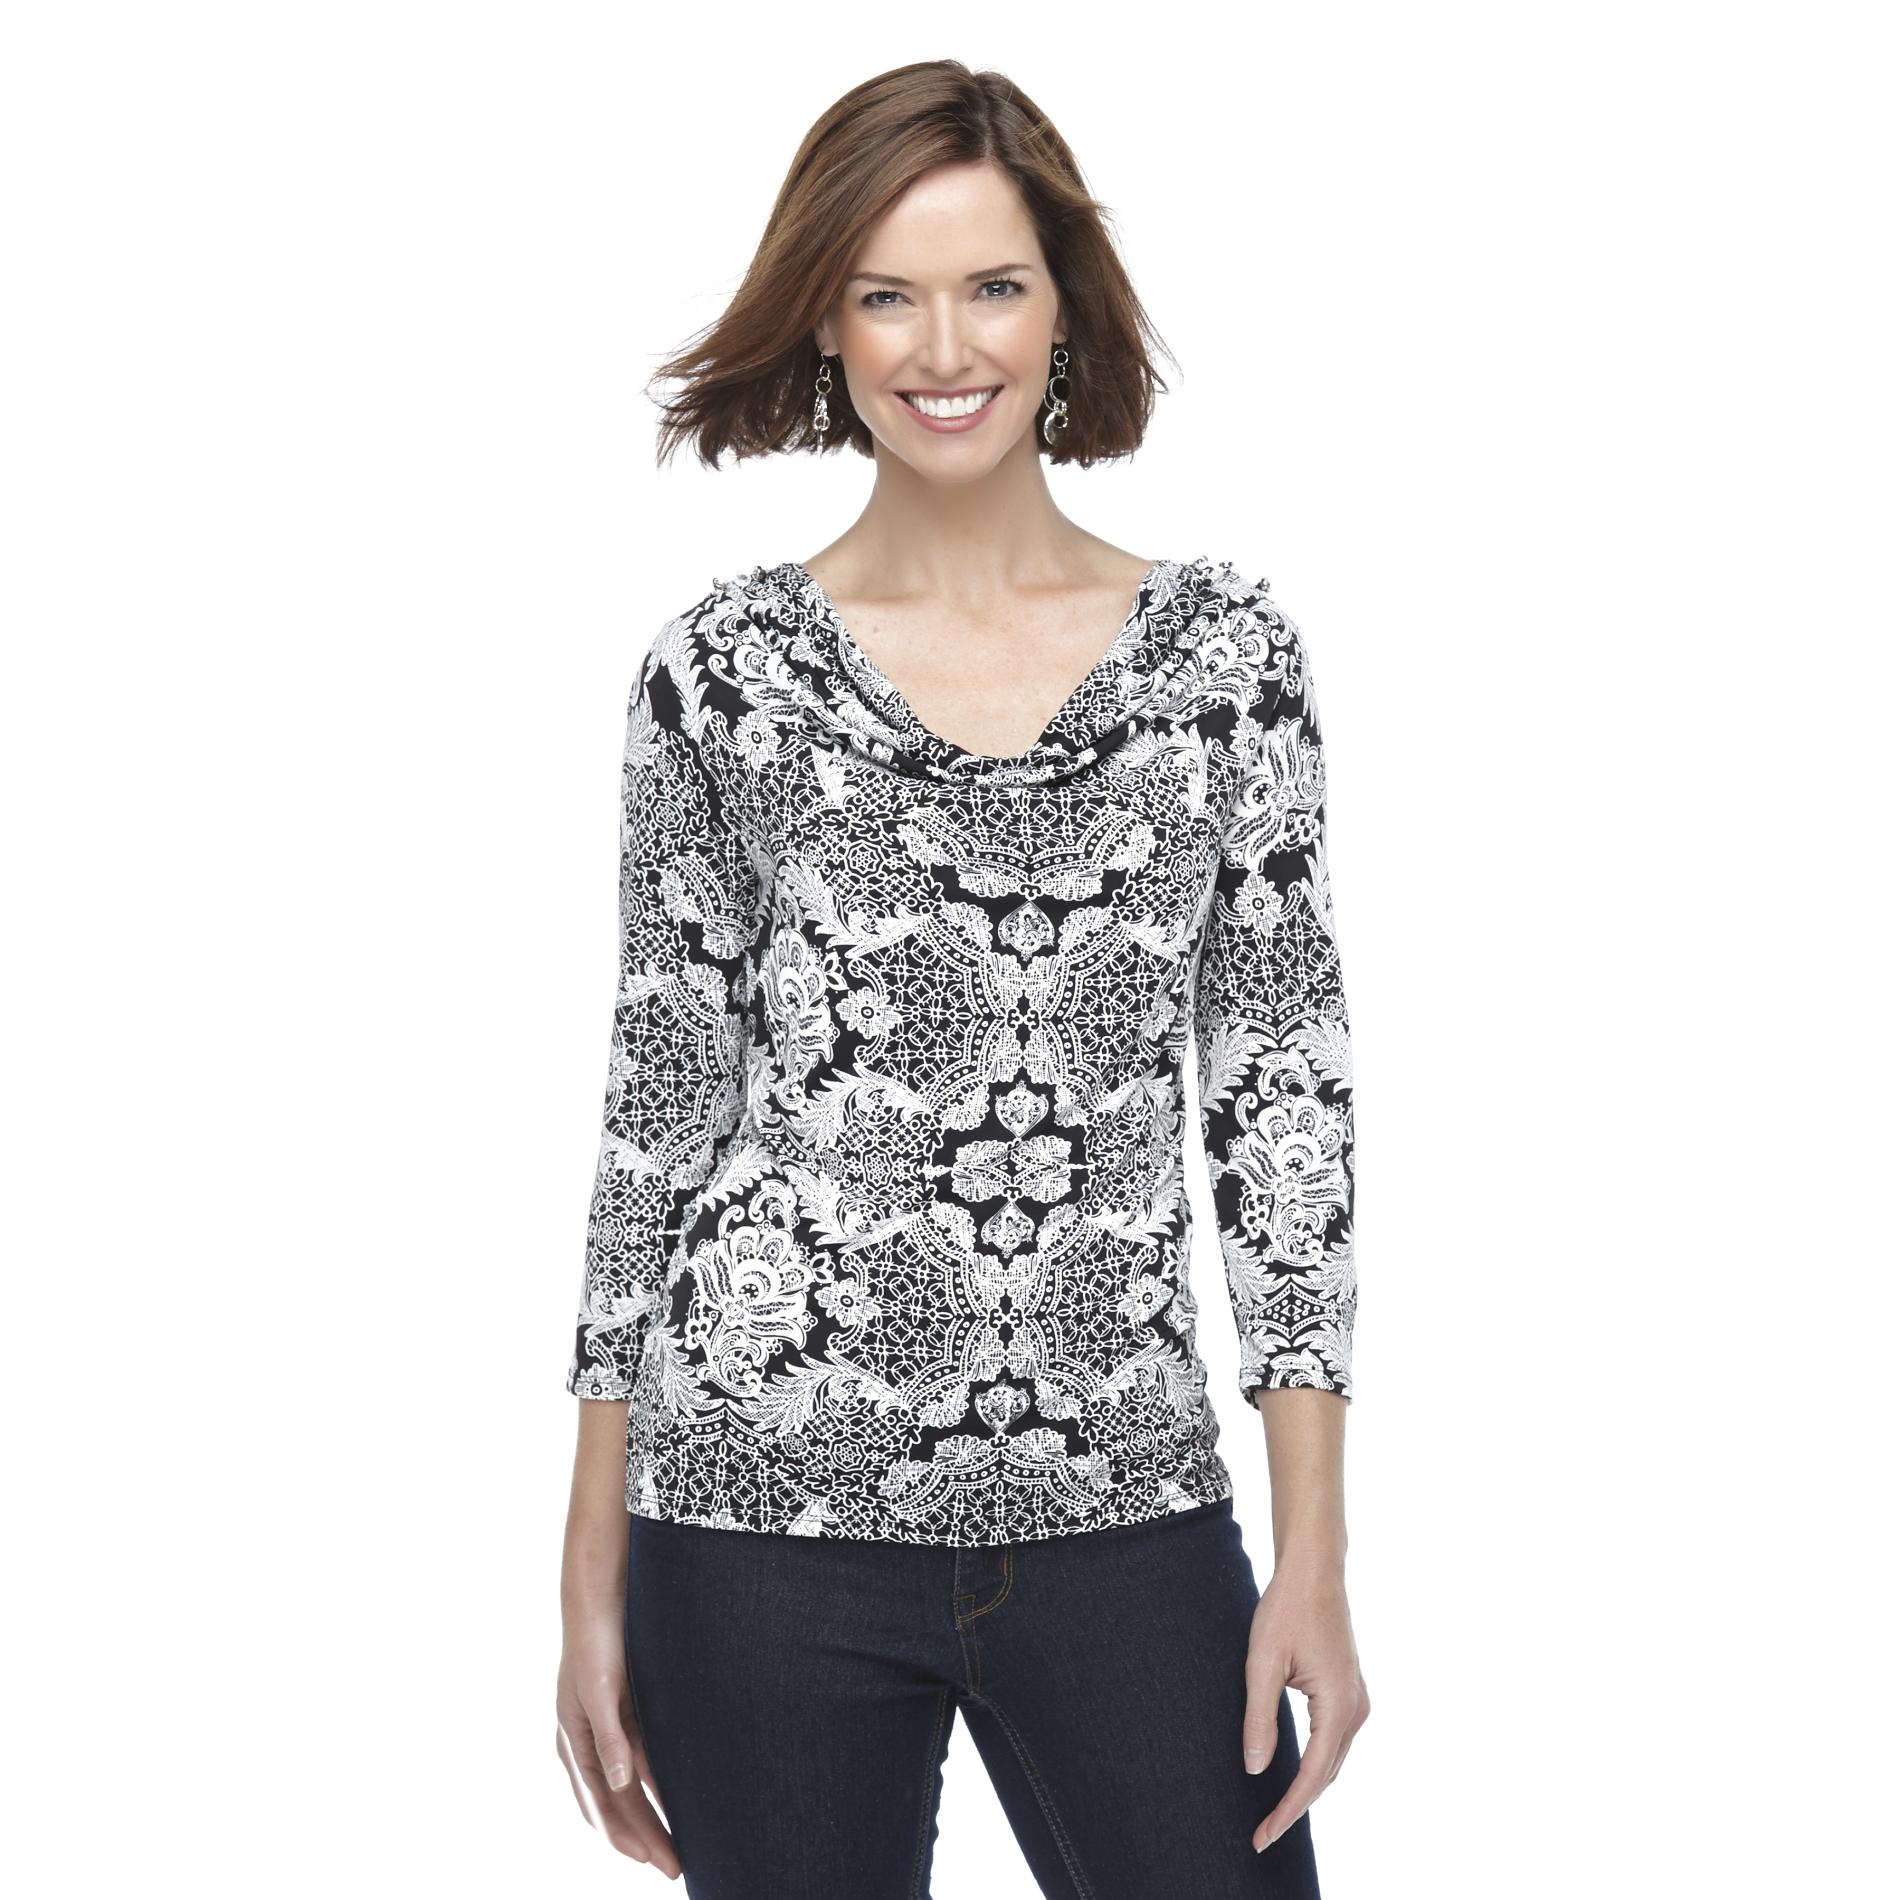 Jaclyn Smith Women's Jeweled Cowl Neck Top - Floral